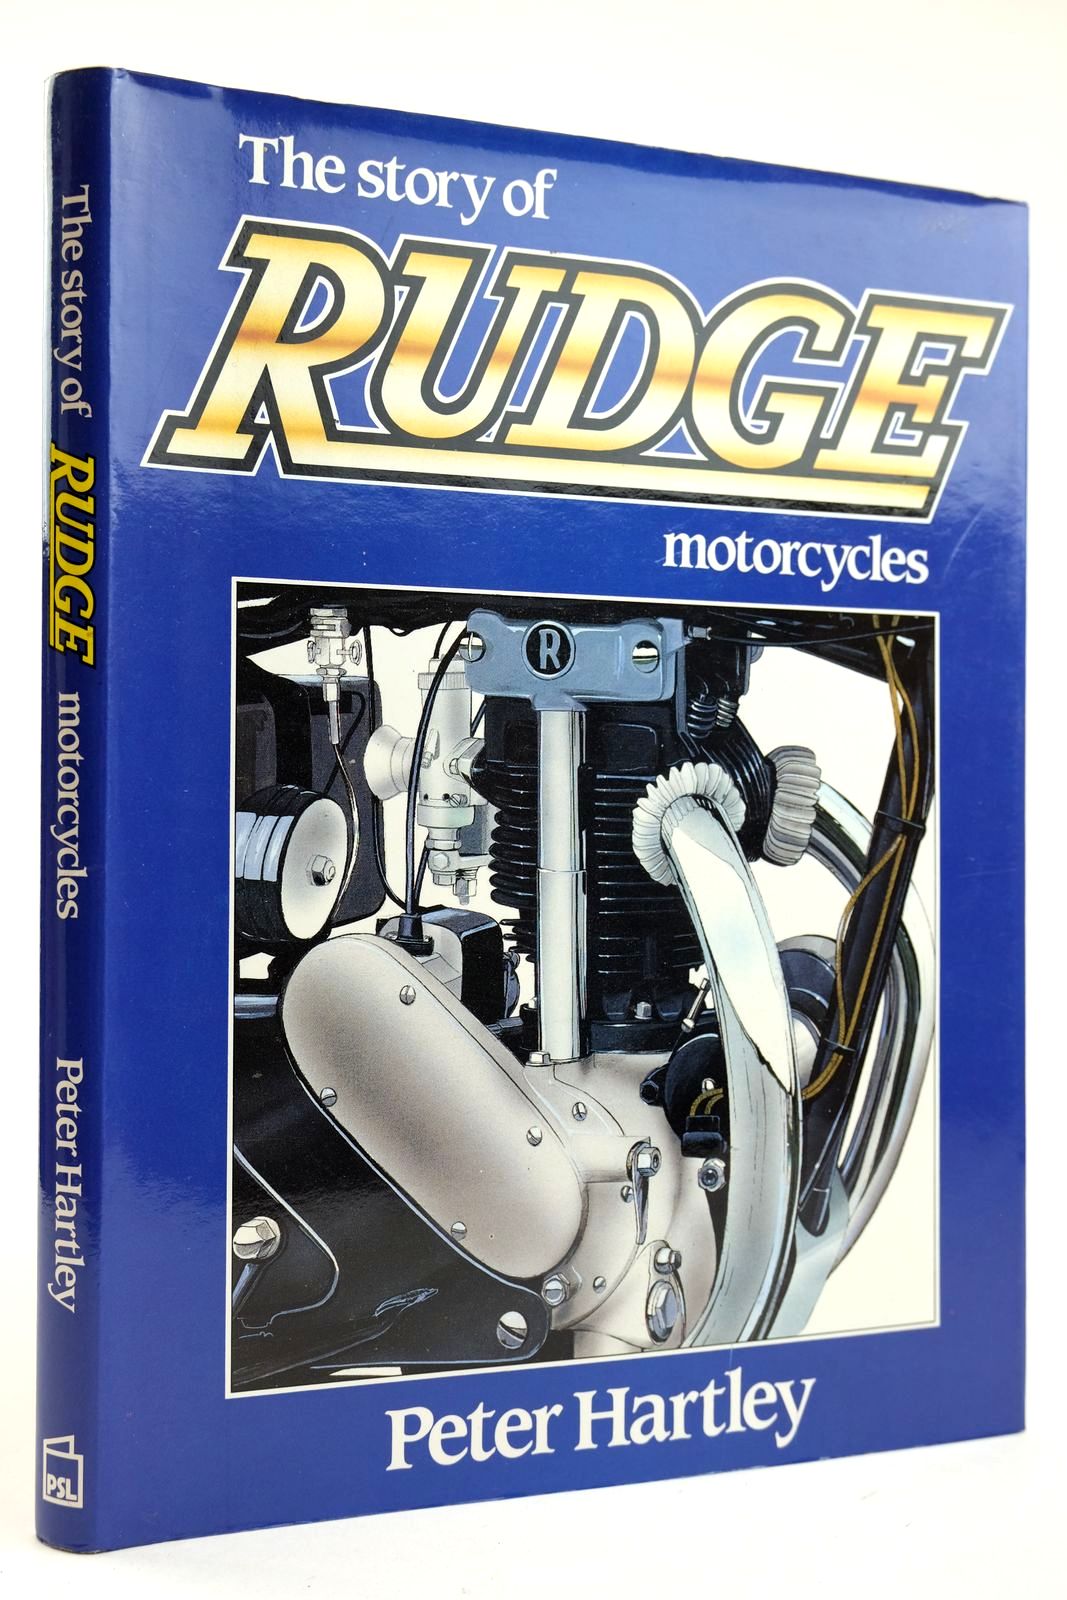 The Story Of Rudge Motorcycles